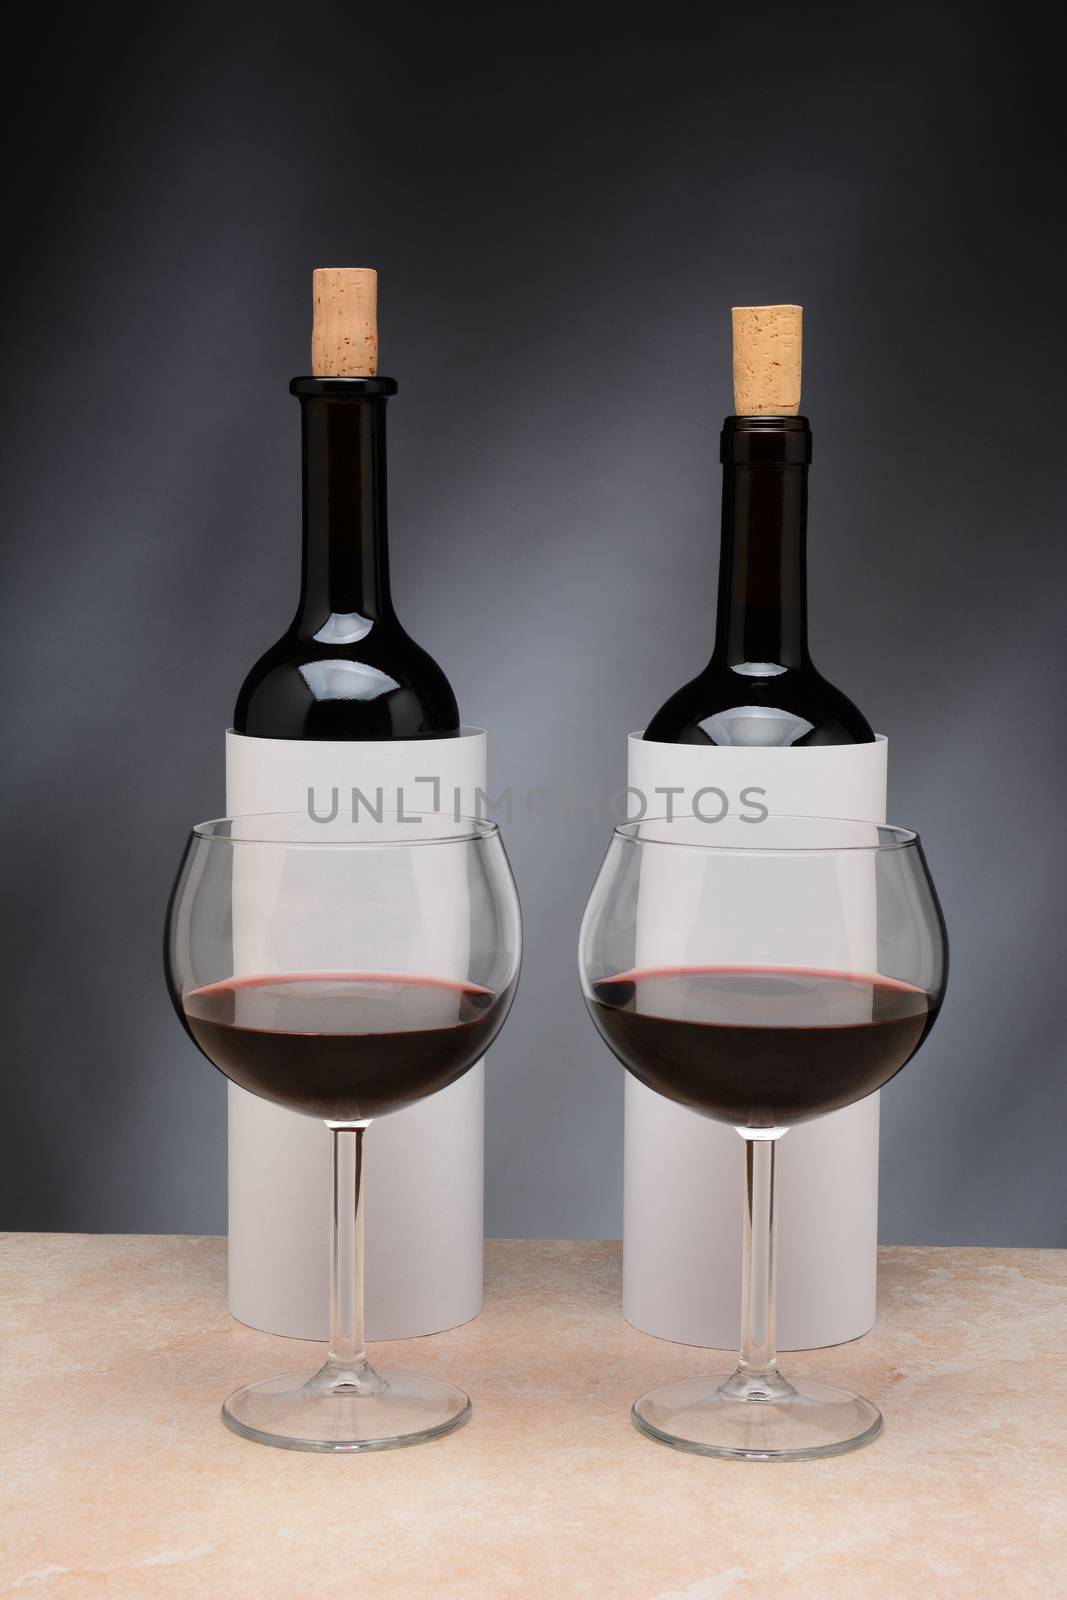 Two different wine bottles and wine glasses set up for a blind wine tasting. The bottles are covered by blank cylinders to hide the label. Vertical format. Wine glasses are partially filled with red wine.